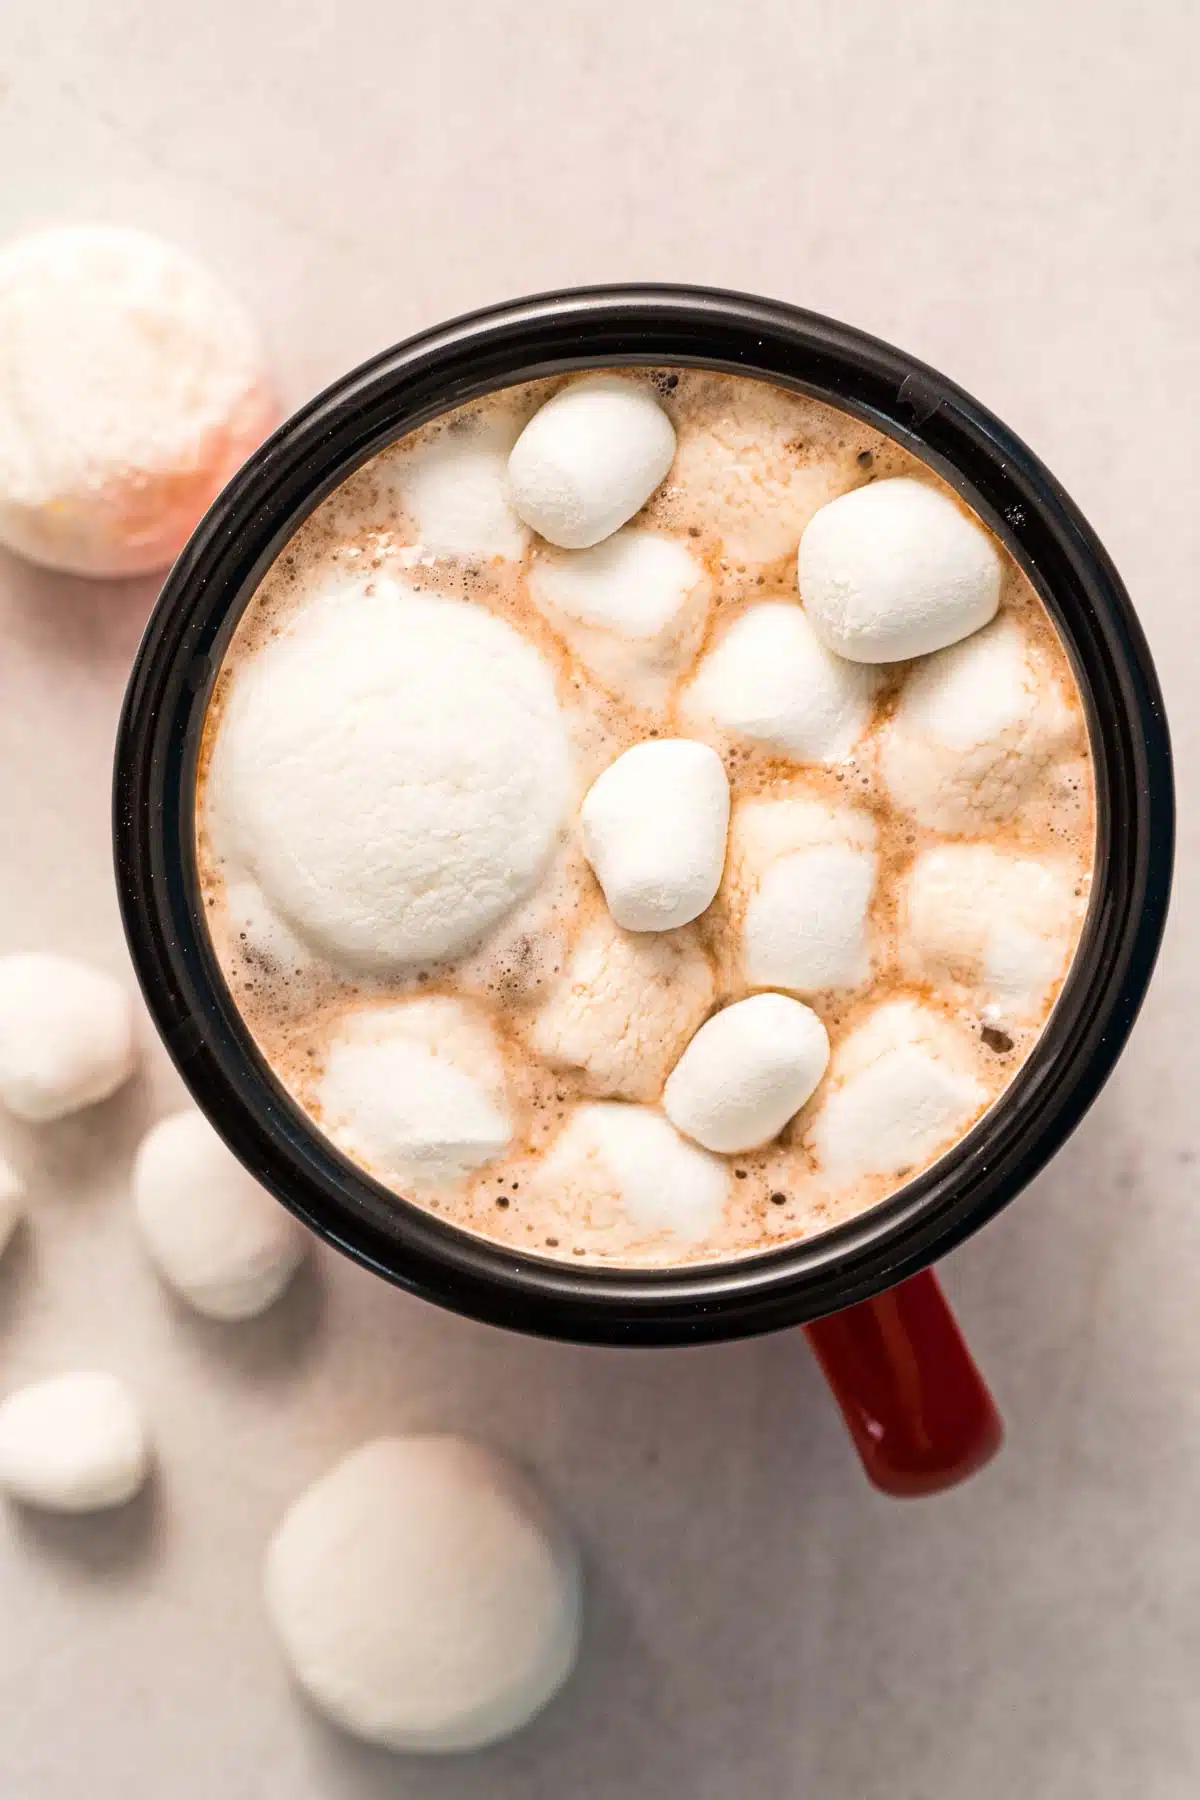 Dehydrated marshmallows in a mug of hot cocoa.